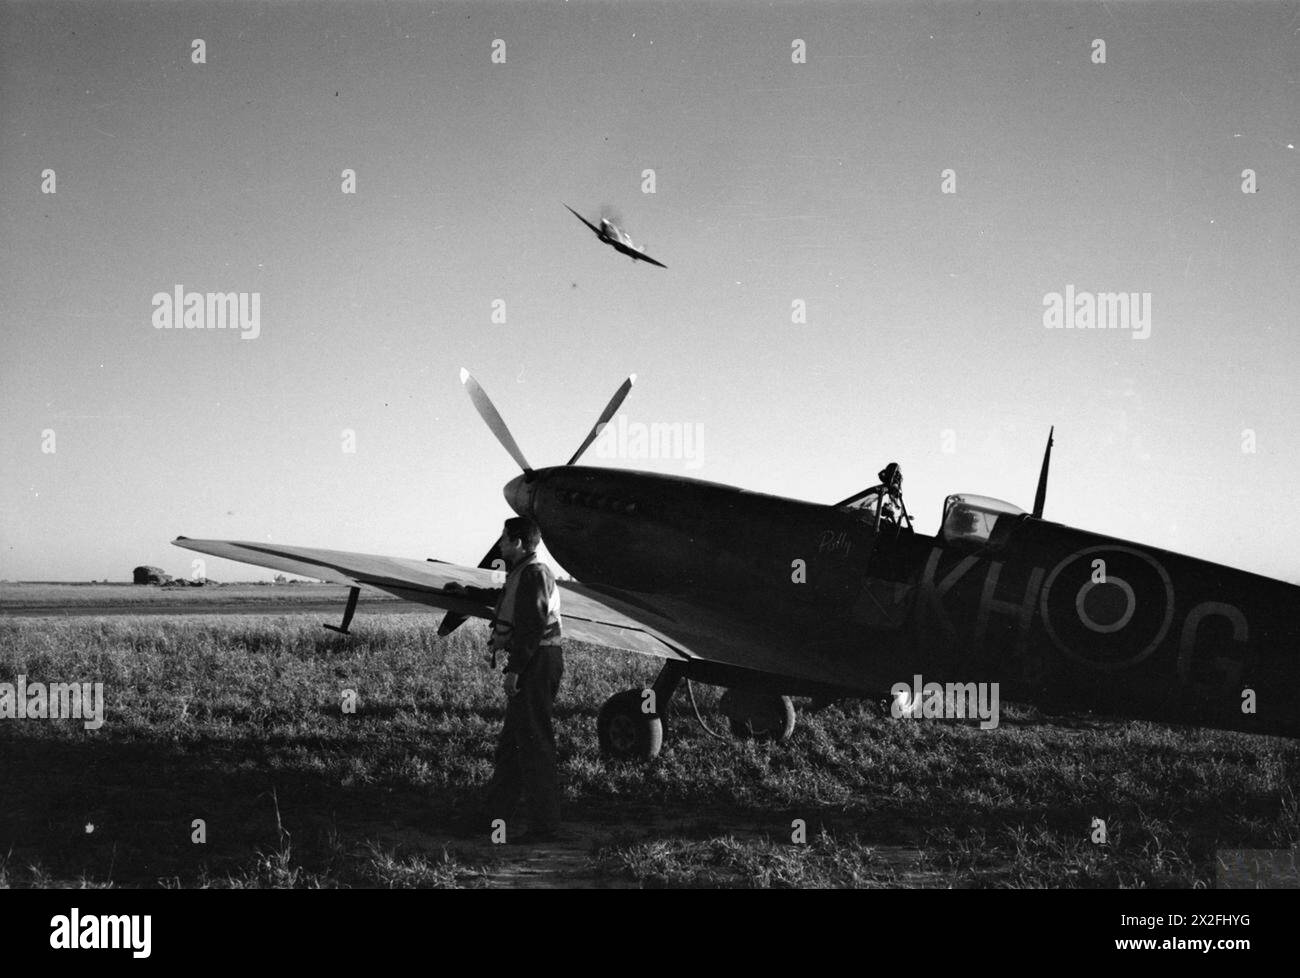 ROYAL AIR FORCE: 2ND TACTICAL AIR FORCE, 1943-1945. - A Supermarine Spitfire of No. 127 (Canadian) Wing takes off on a dusk patrol from B2/Bazenville, Normandy, while a Spitfire Mark IX of No. 403 Squadron RCAF waits at readiness Royal Canadian Air Force, 403 Squadron, Royal Air Force, Maintenance Unit, 201 Stock Photo